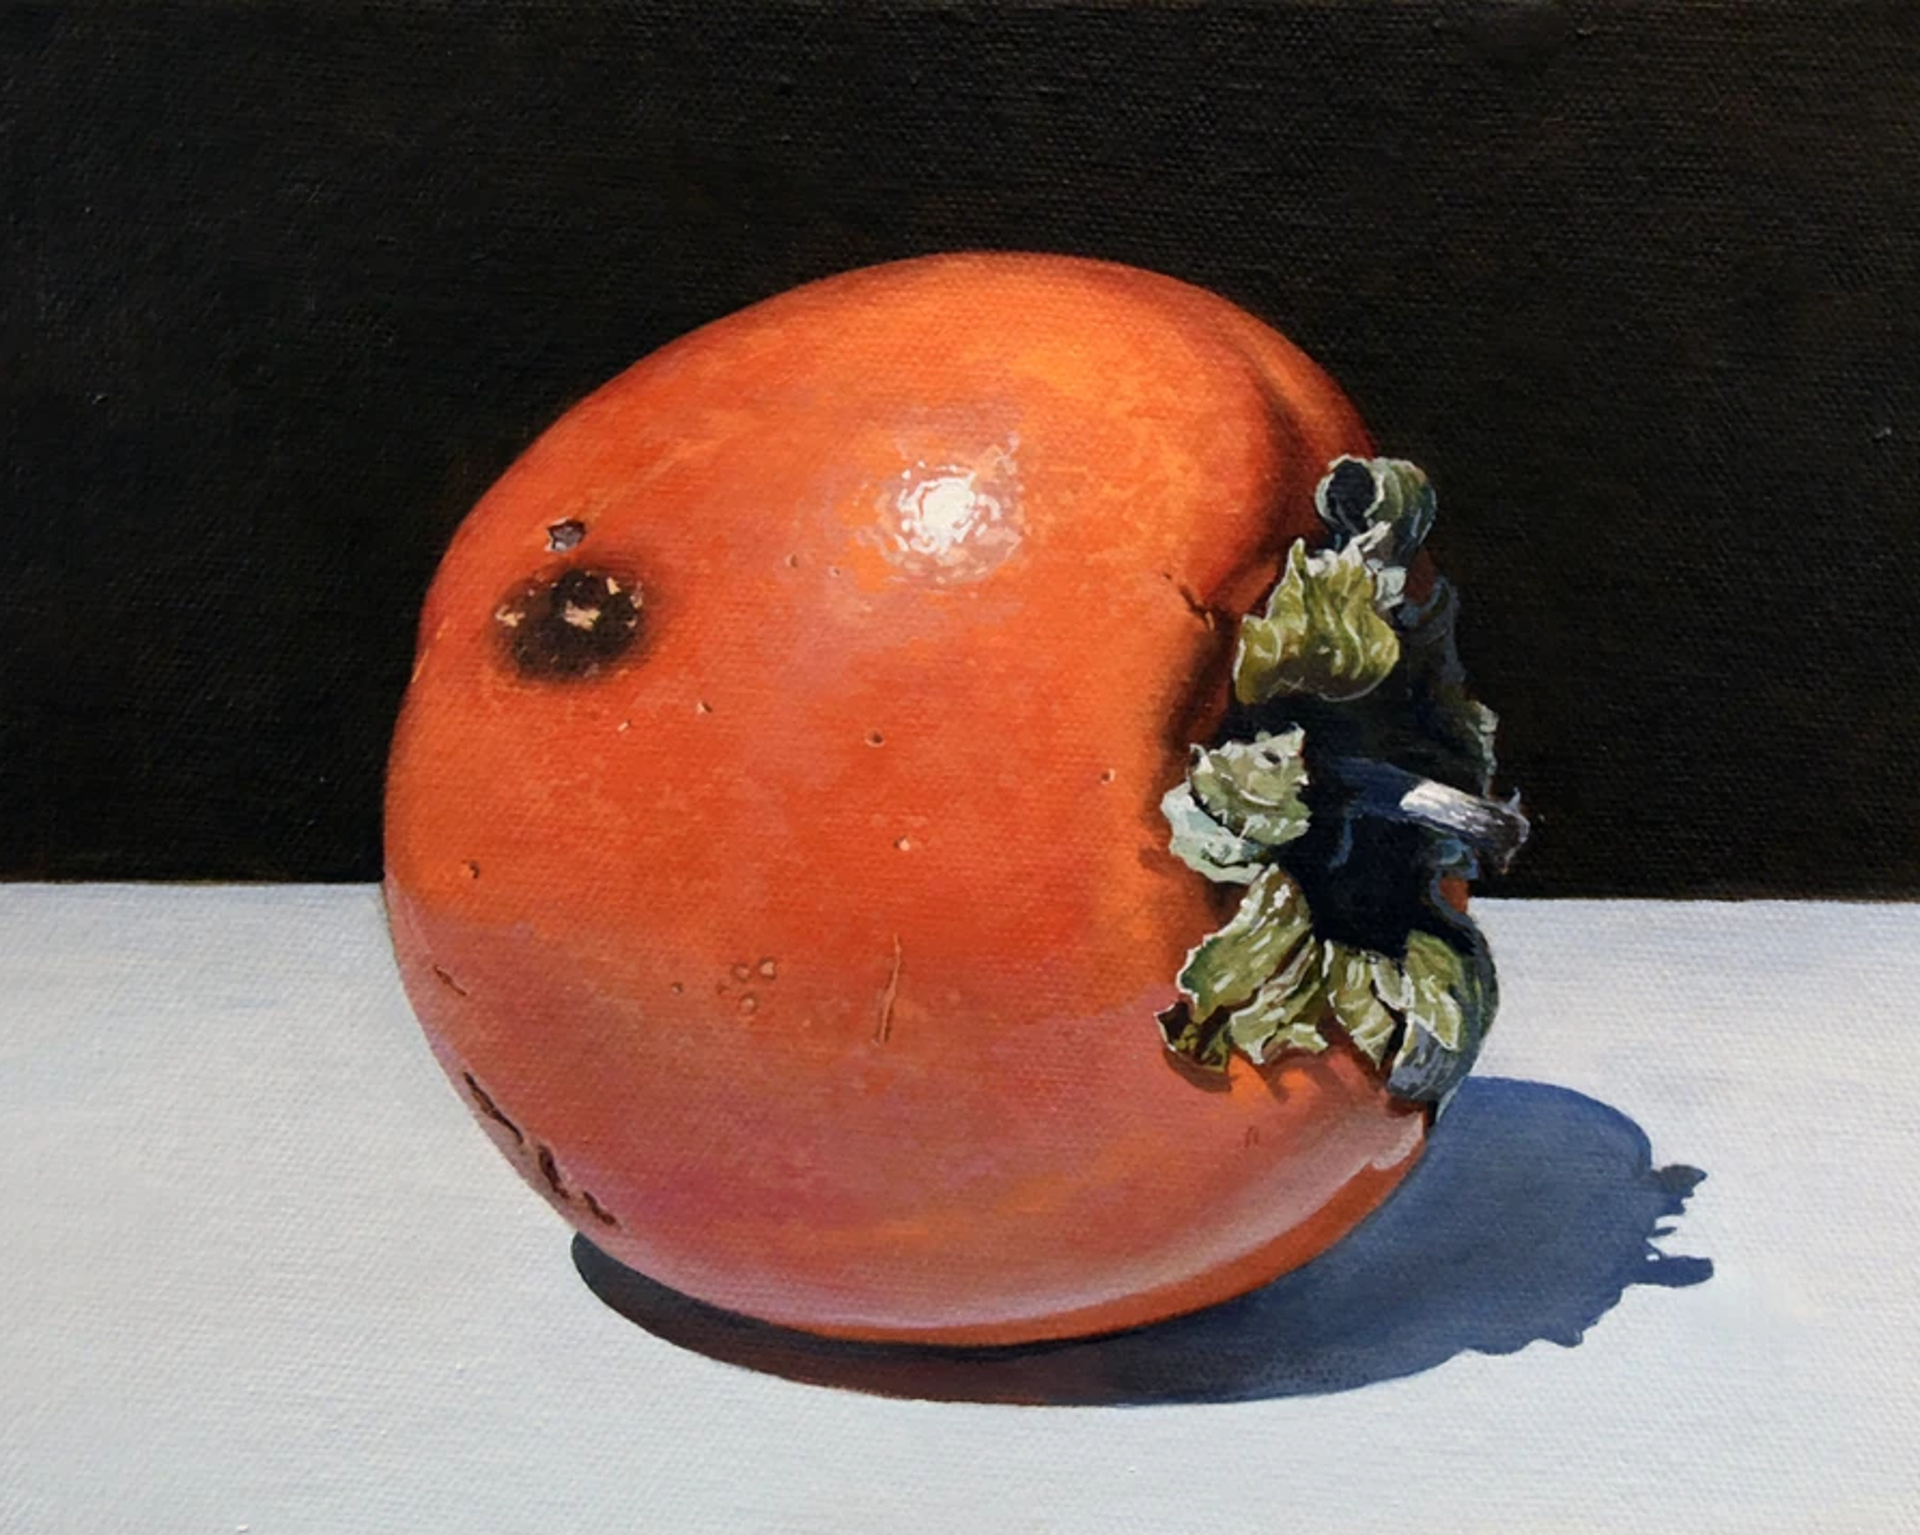 Light of Life - PERSIMMON 22 by Paul Art Lee